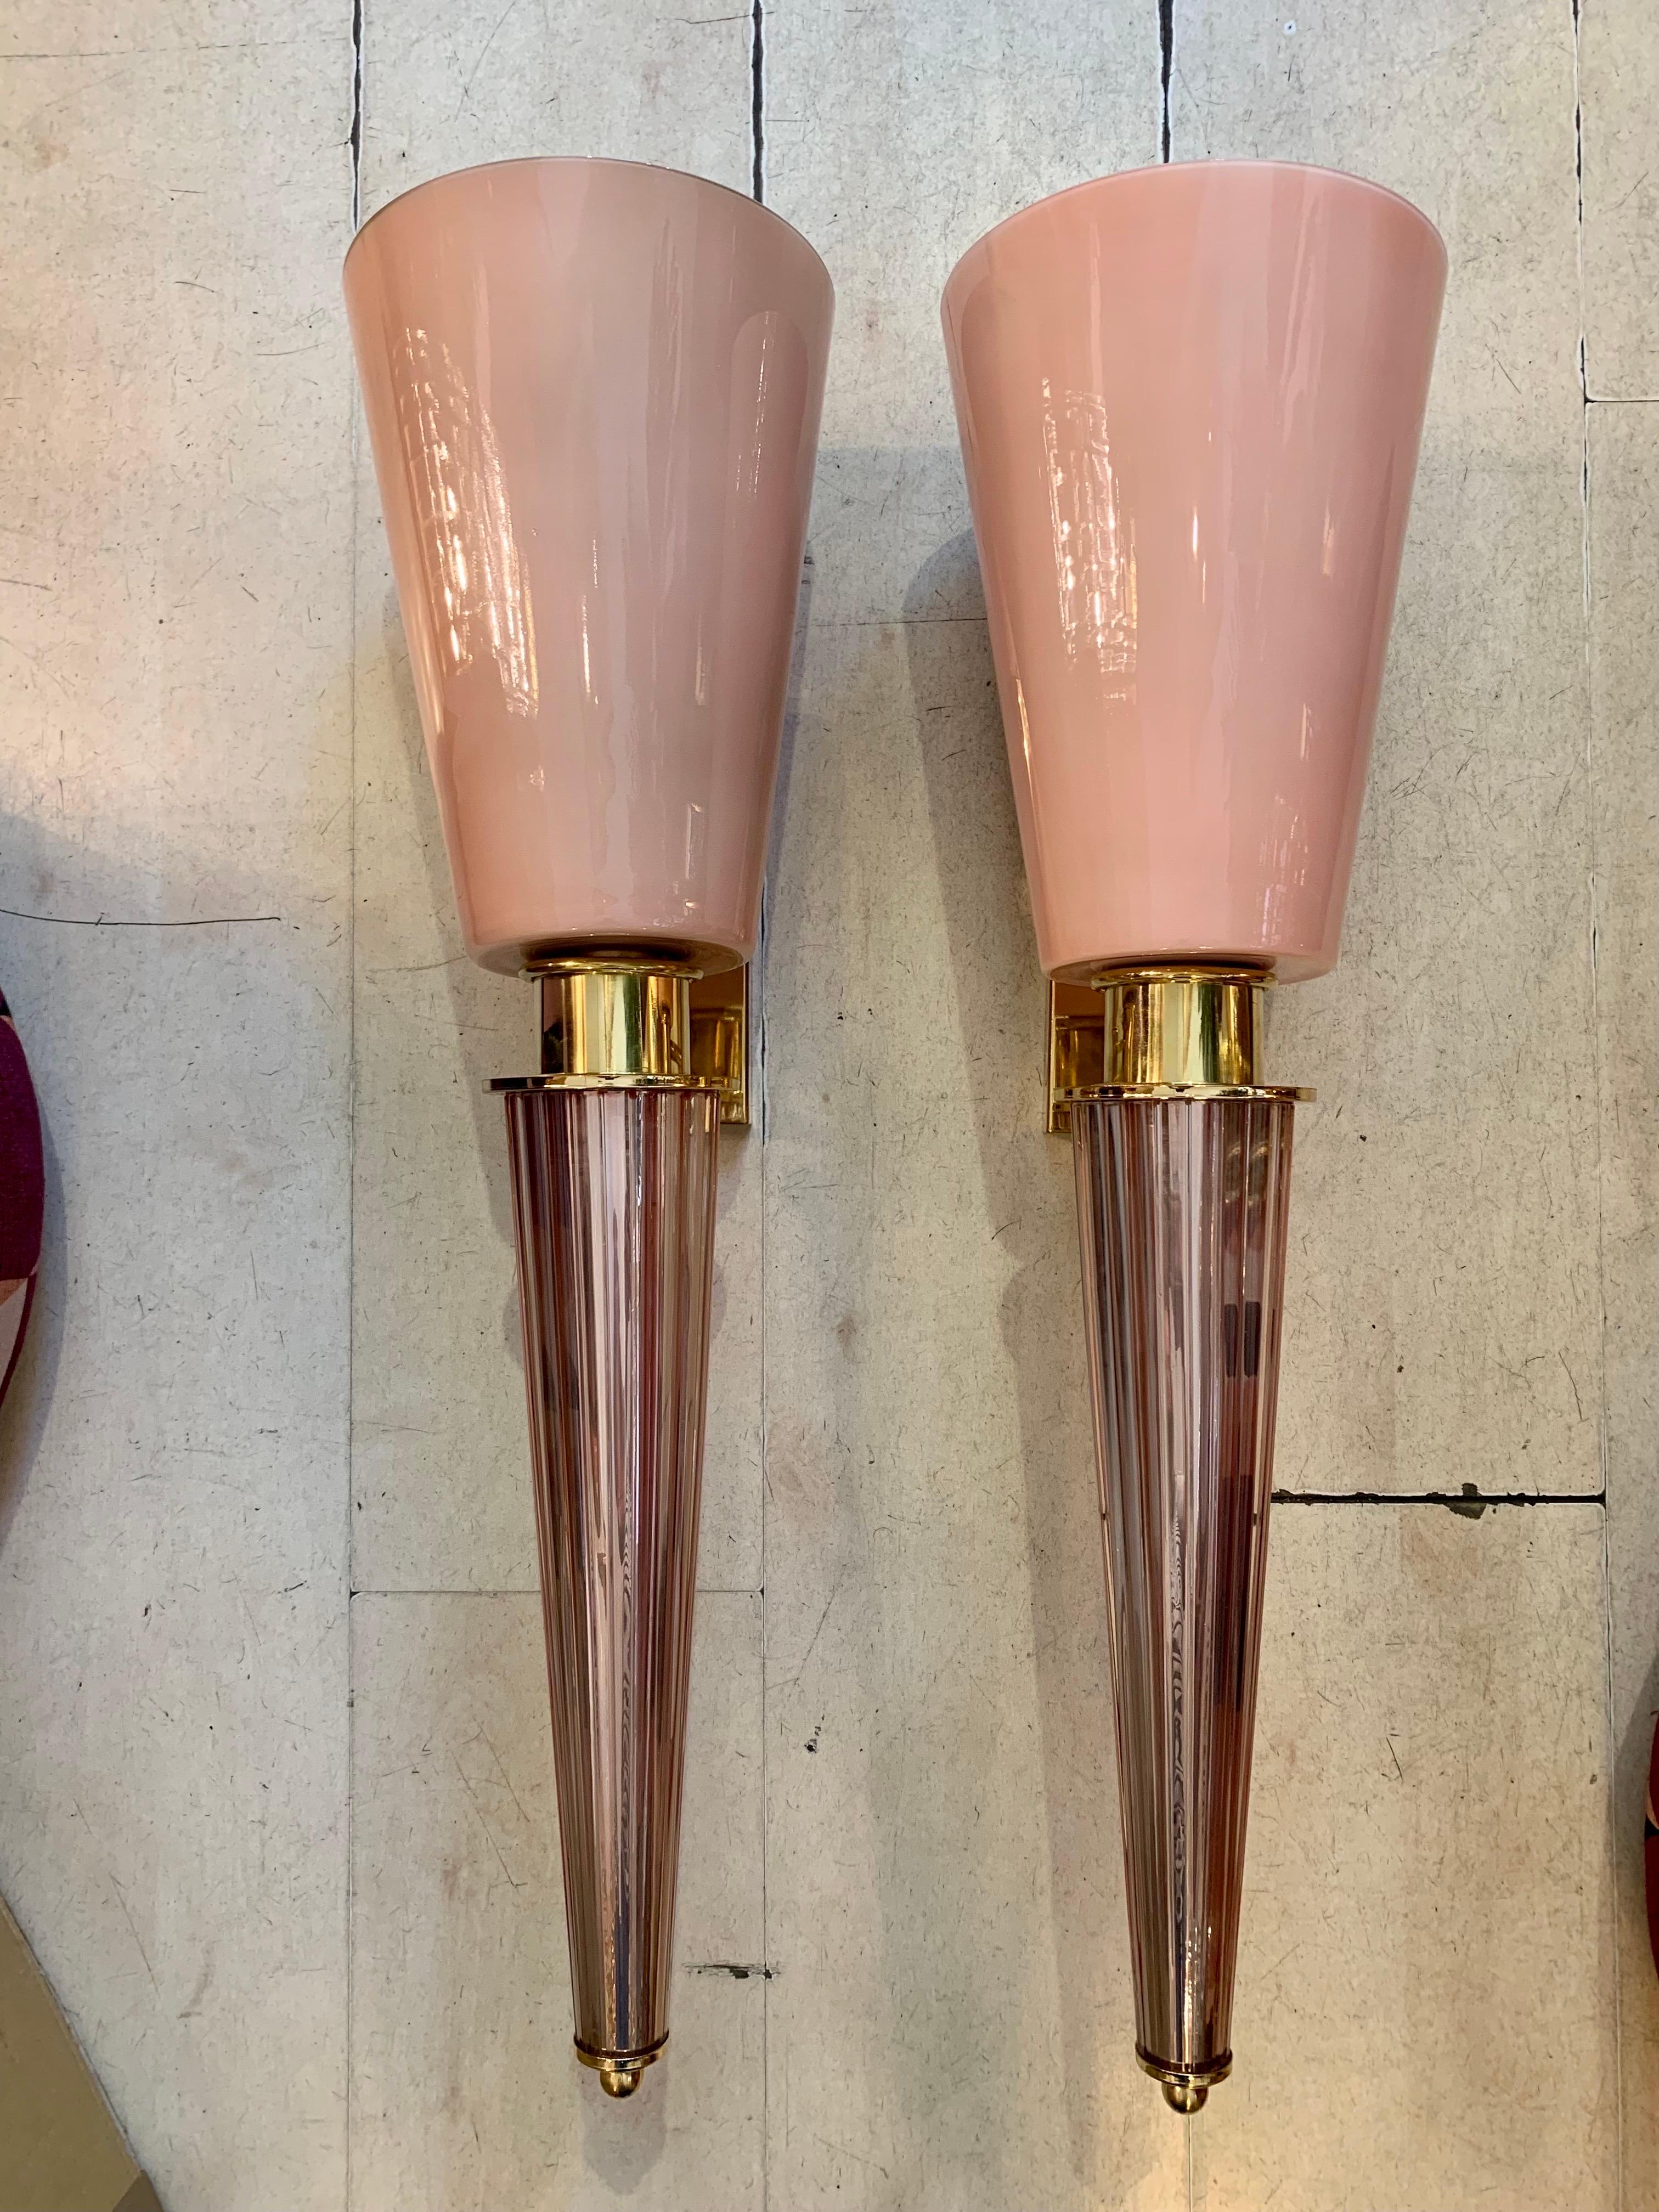 Italian Pair of Art Deco Pink Conical Murano Wall Sconces, Brass Fittings, 1940s